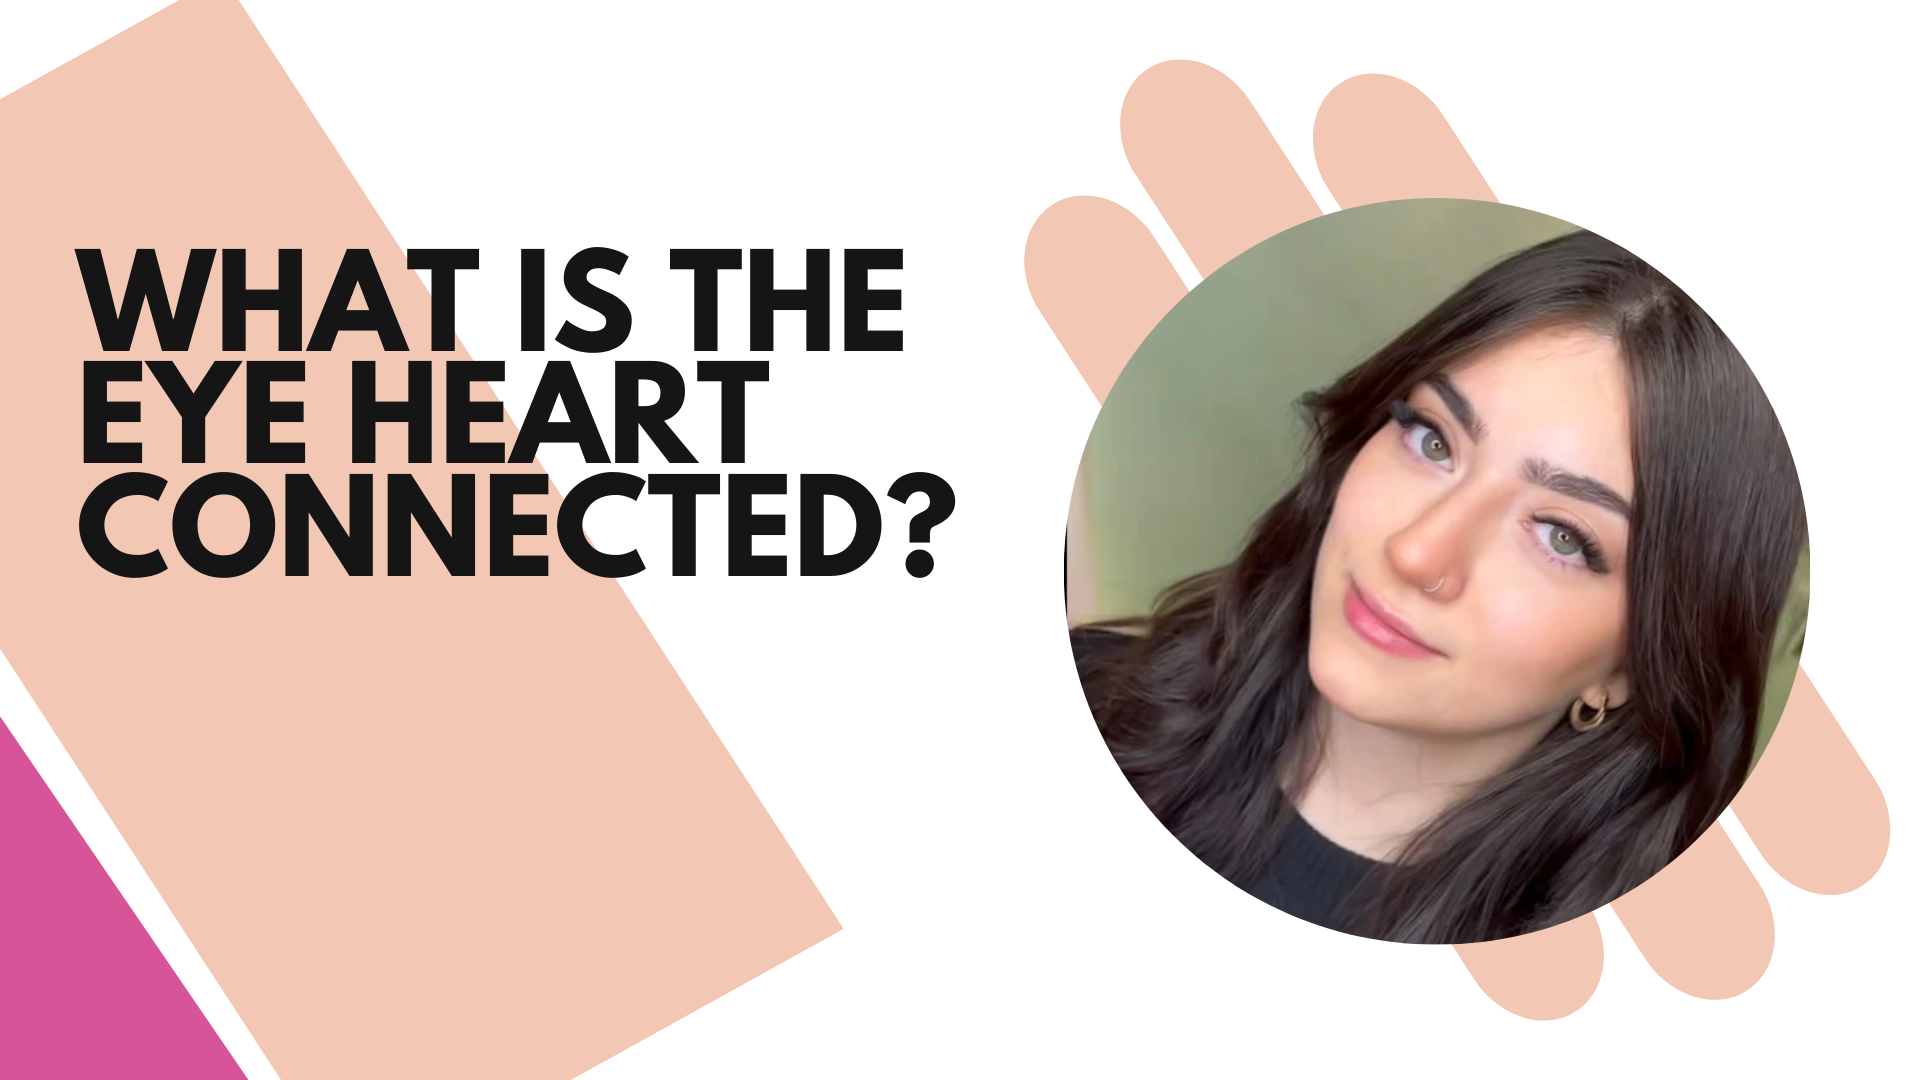 WHAT IS THE EYE HEART CONNECTED?